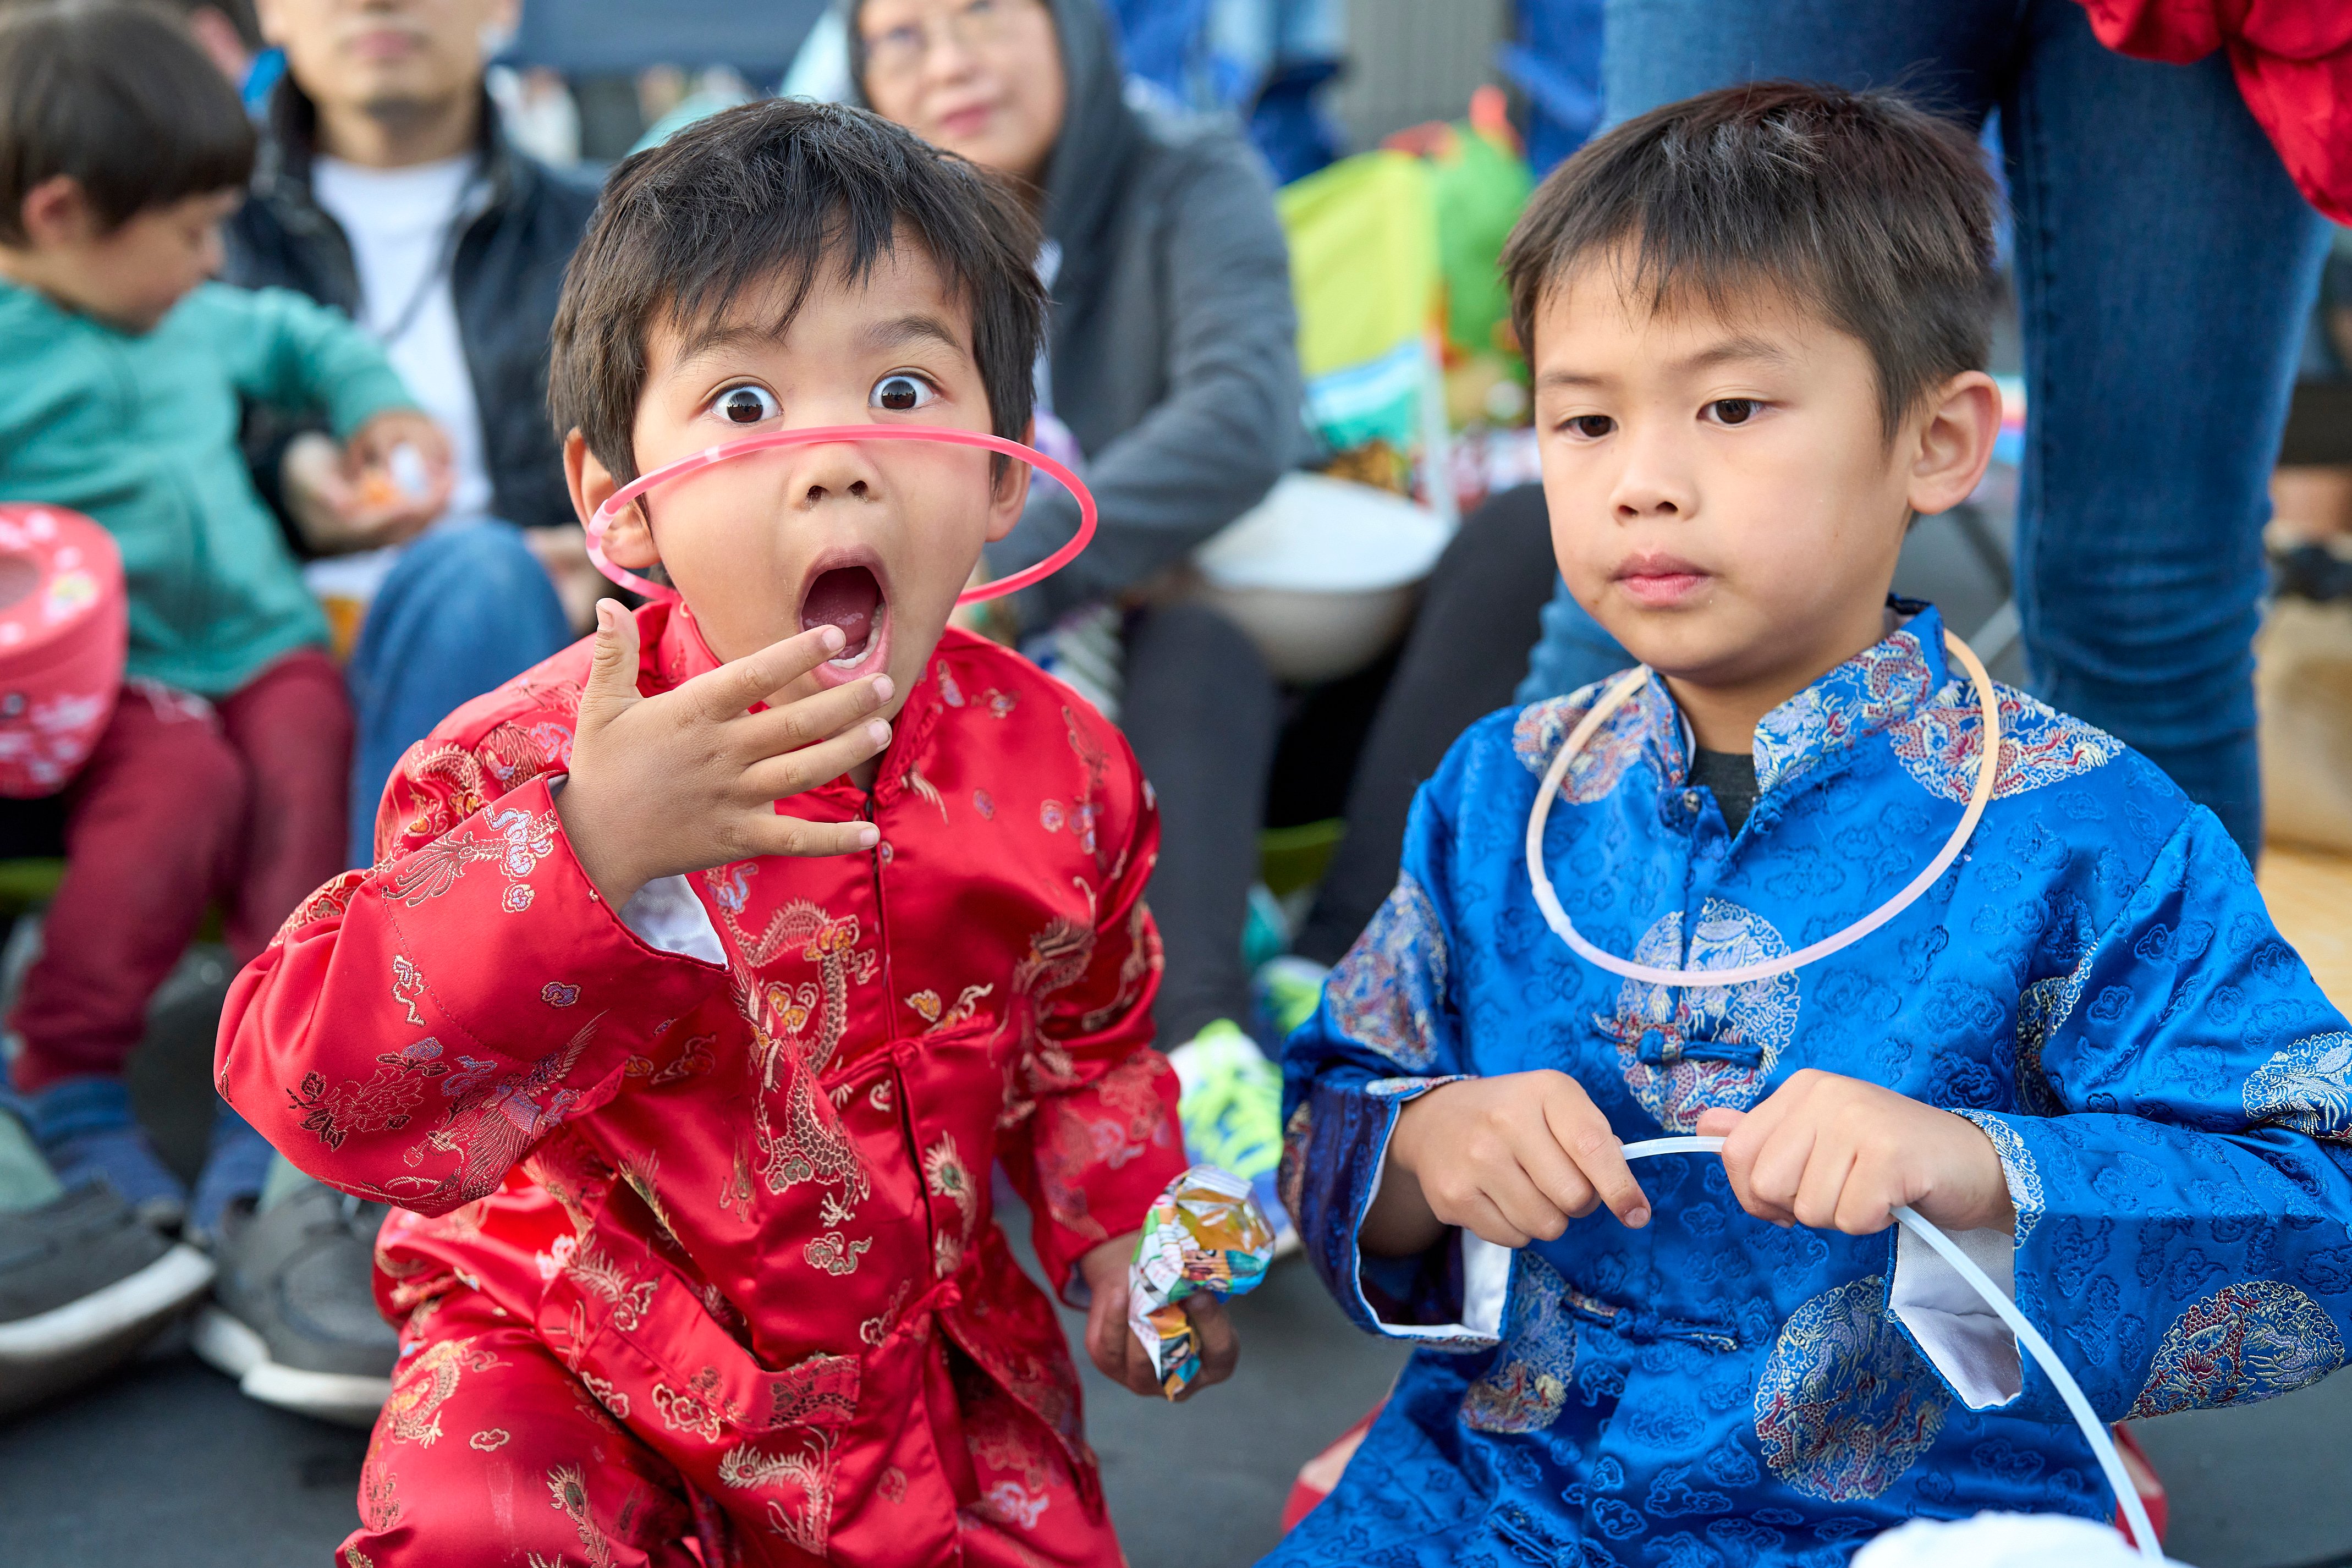 Children in traditional Chinese regalia getting set for the lantern parade.